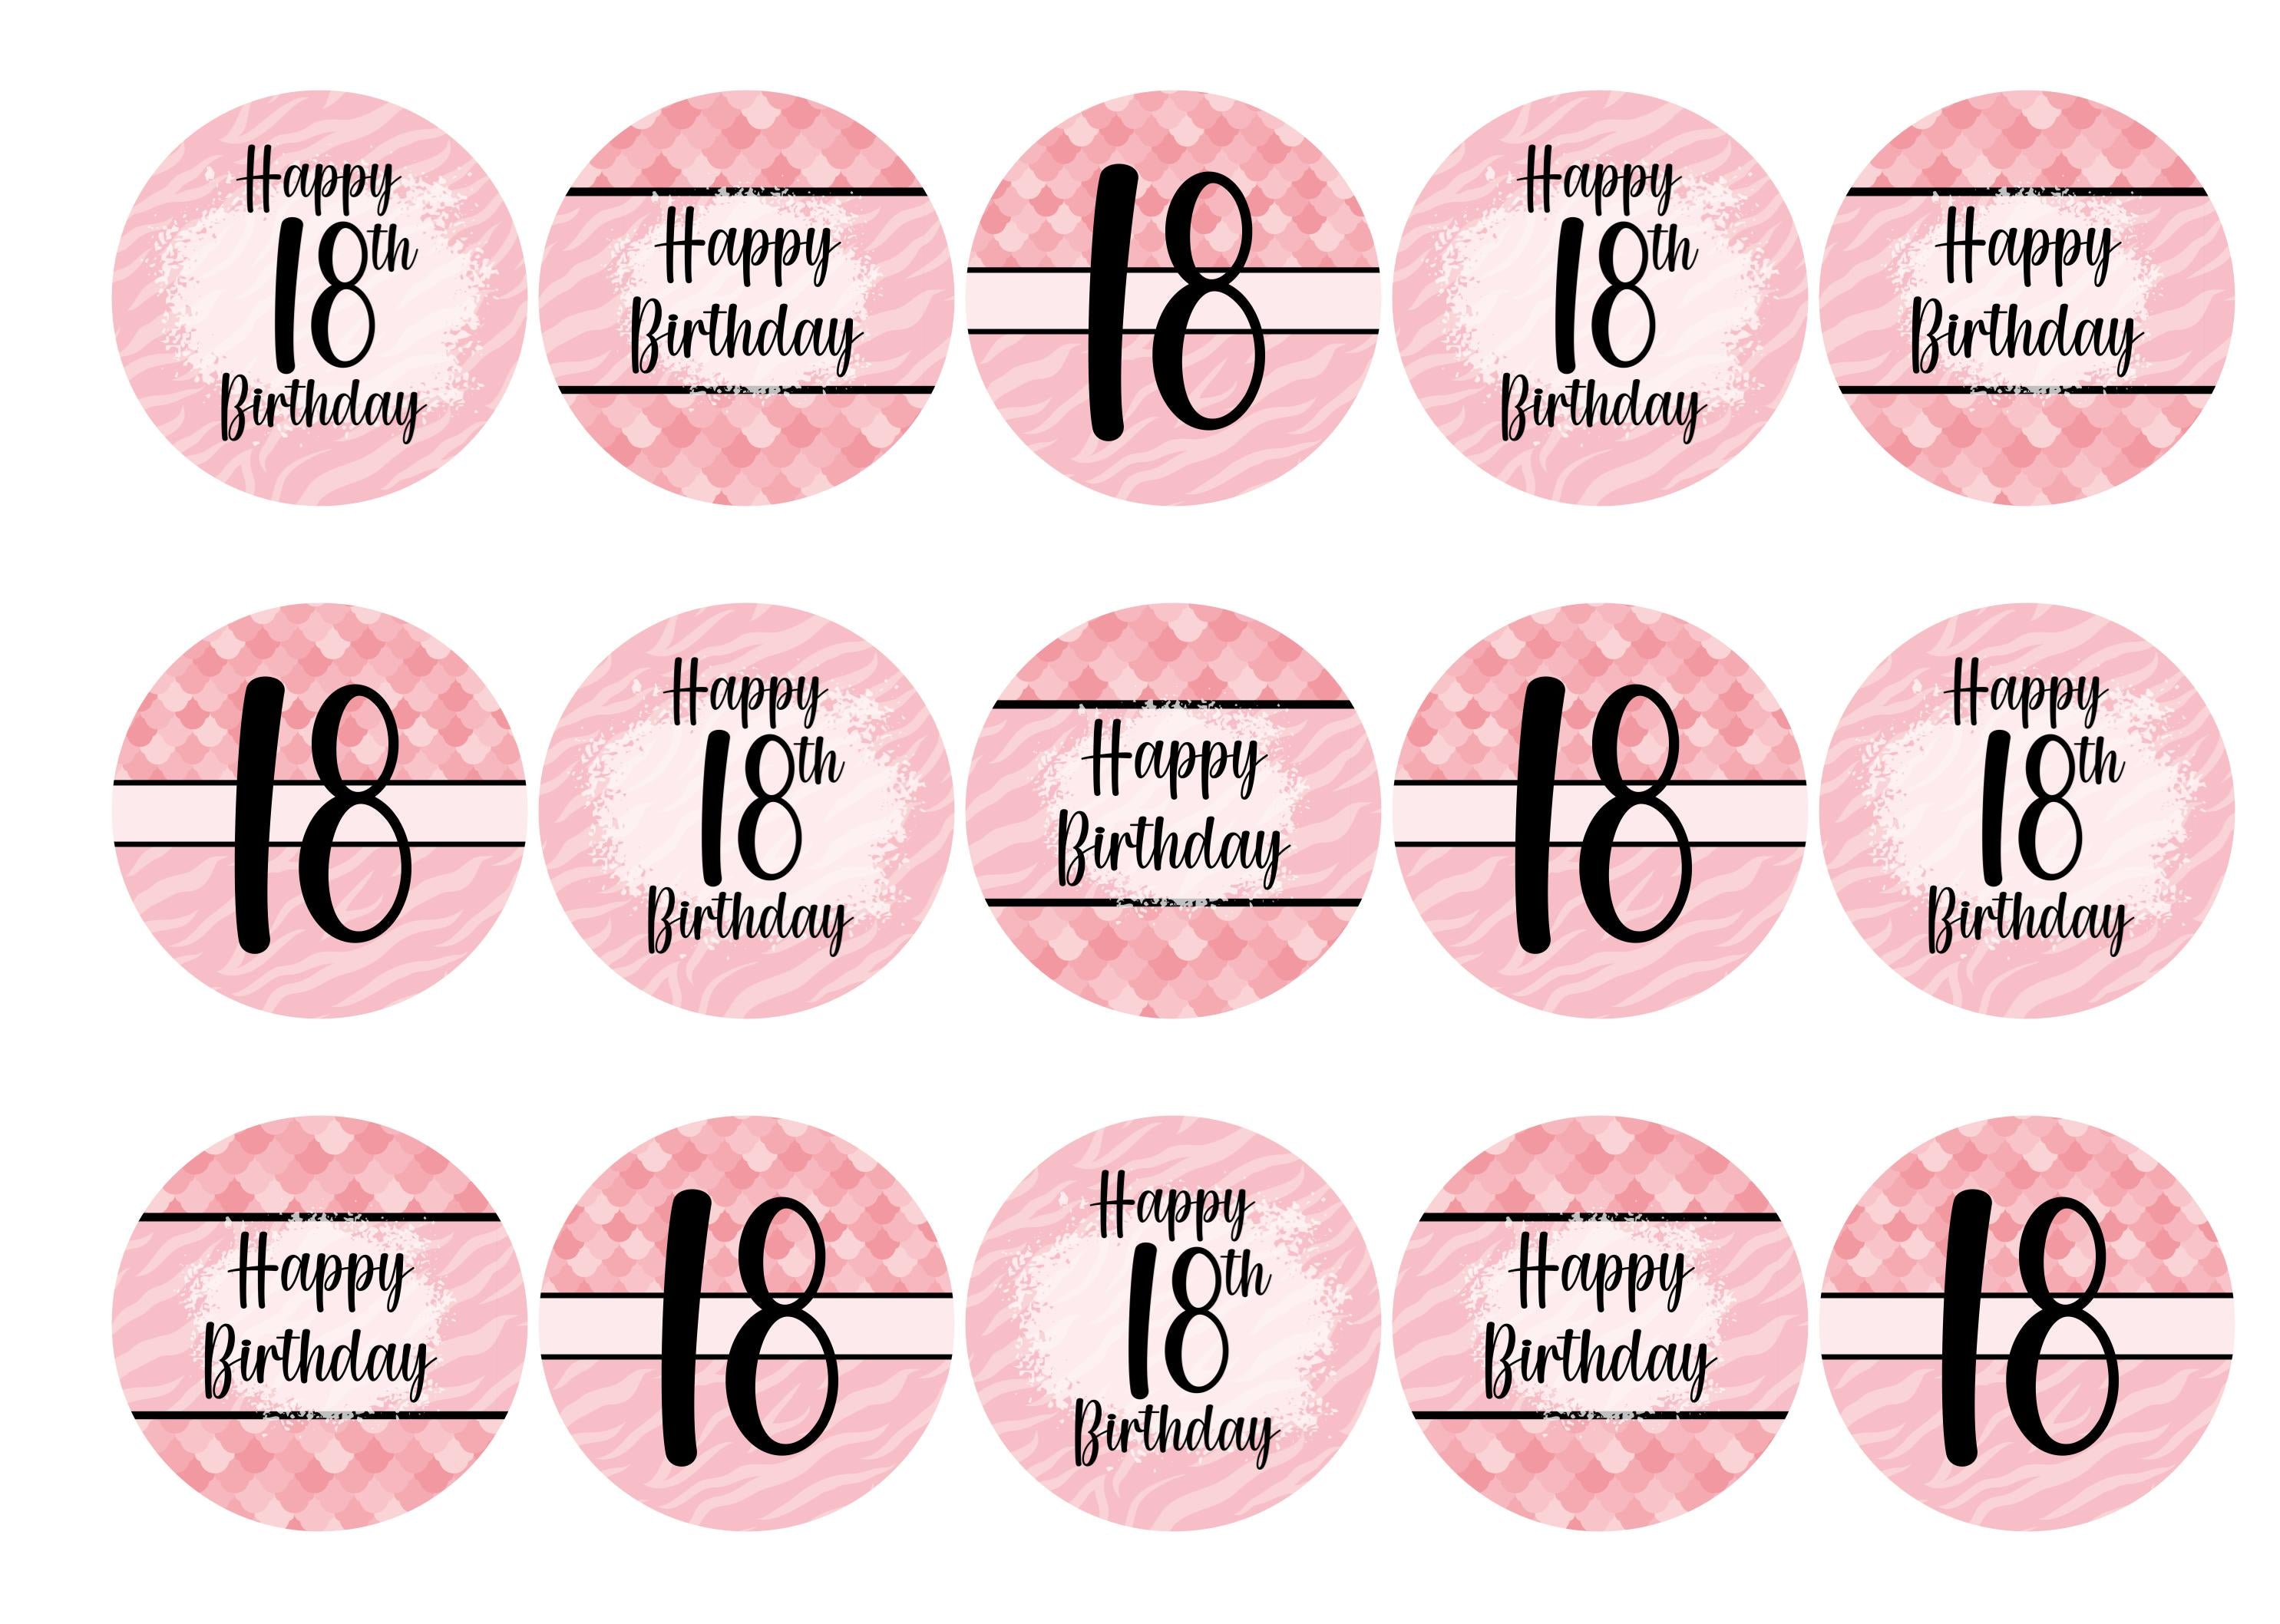 Pink animal print themed 18th birthday cupcake toppers